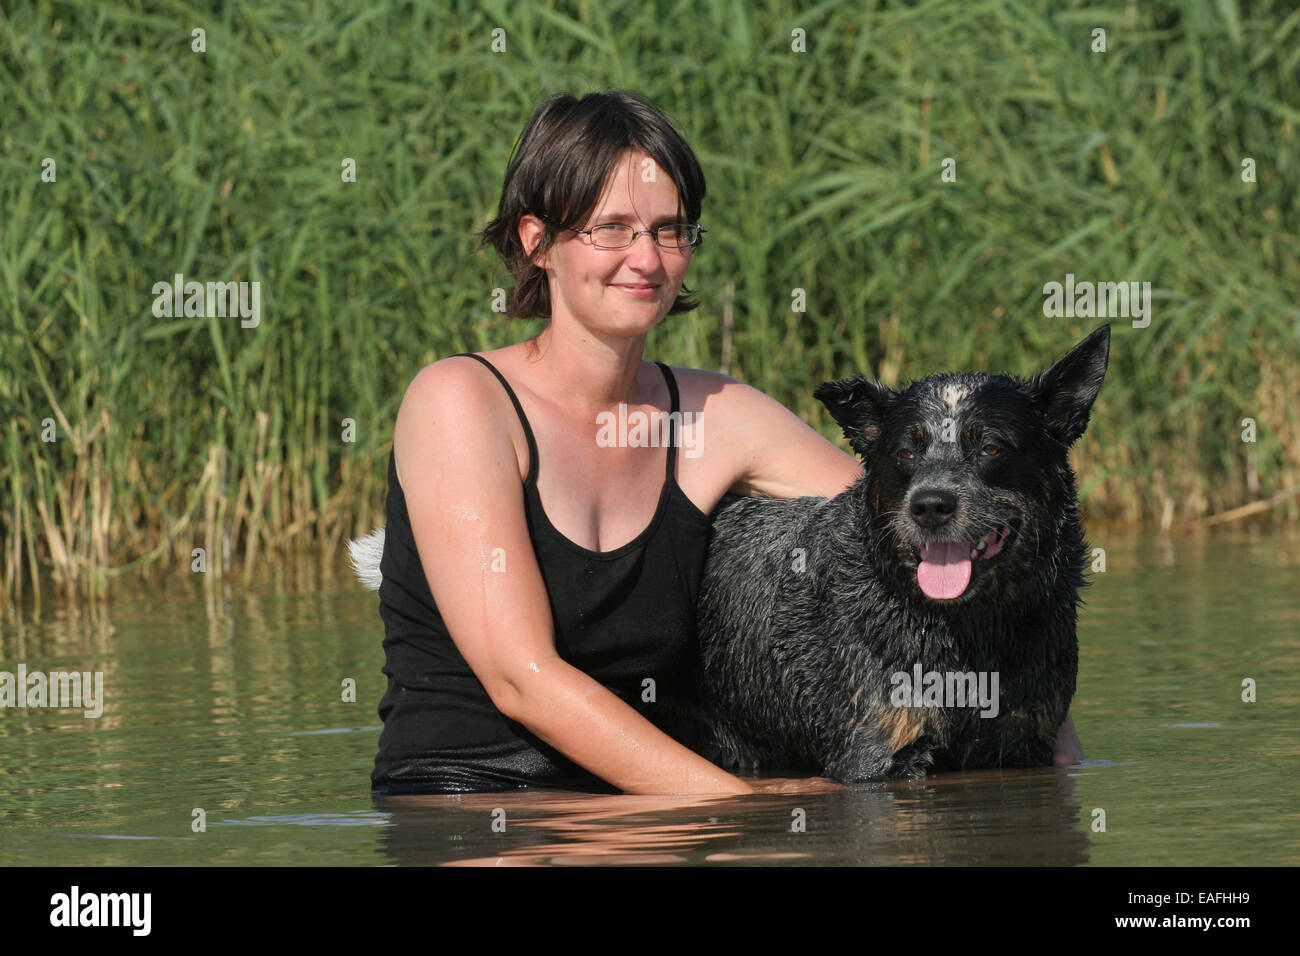 Australian Cattle Dog bathing at water with woman Stock Photo